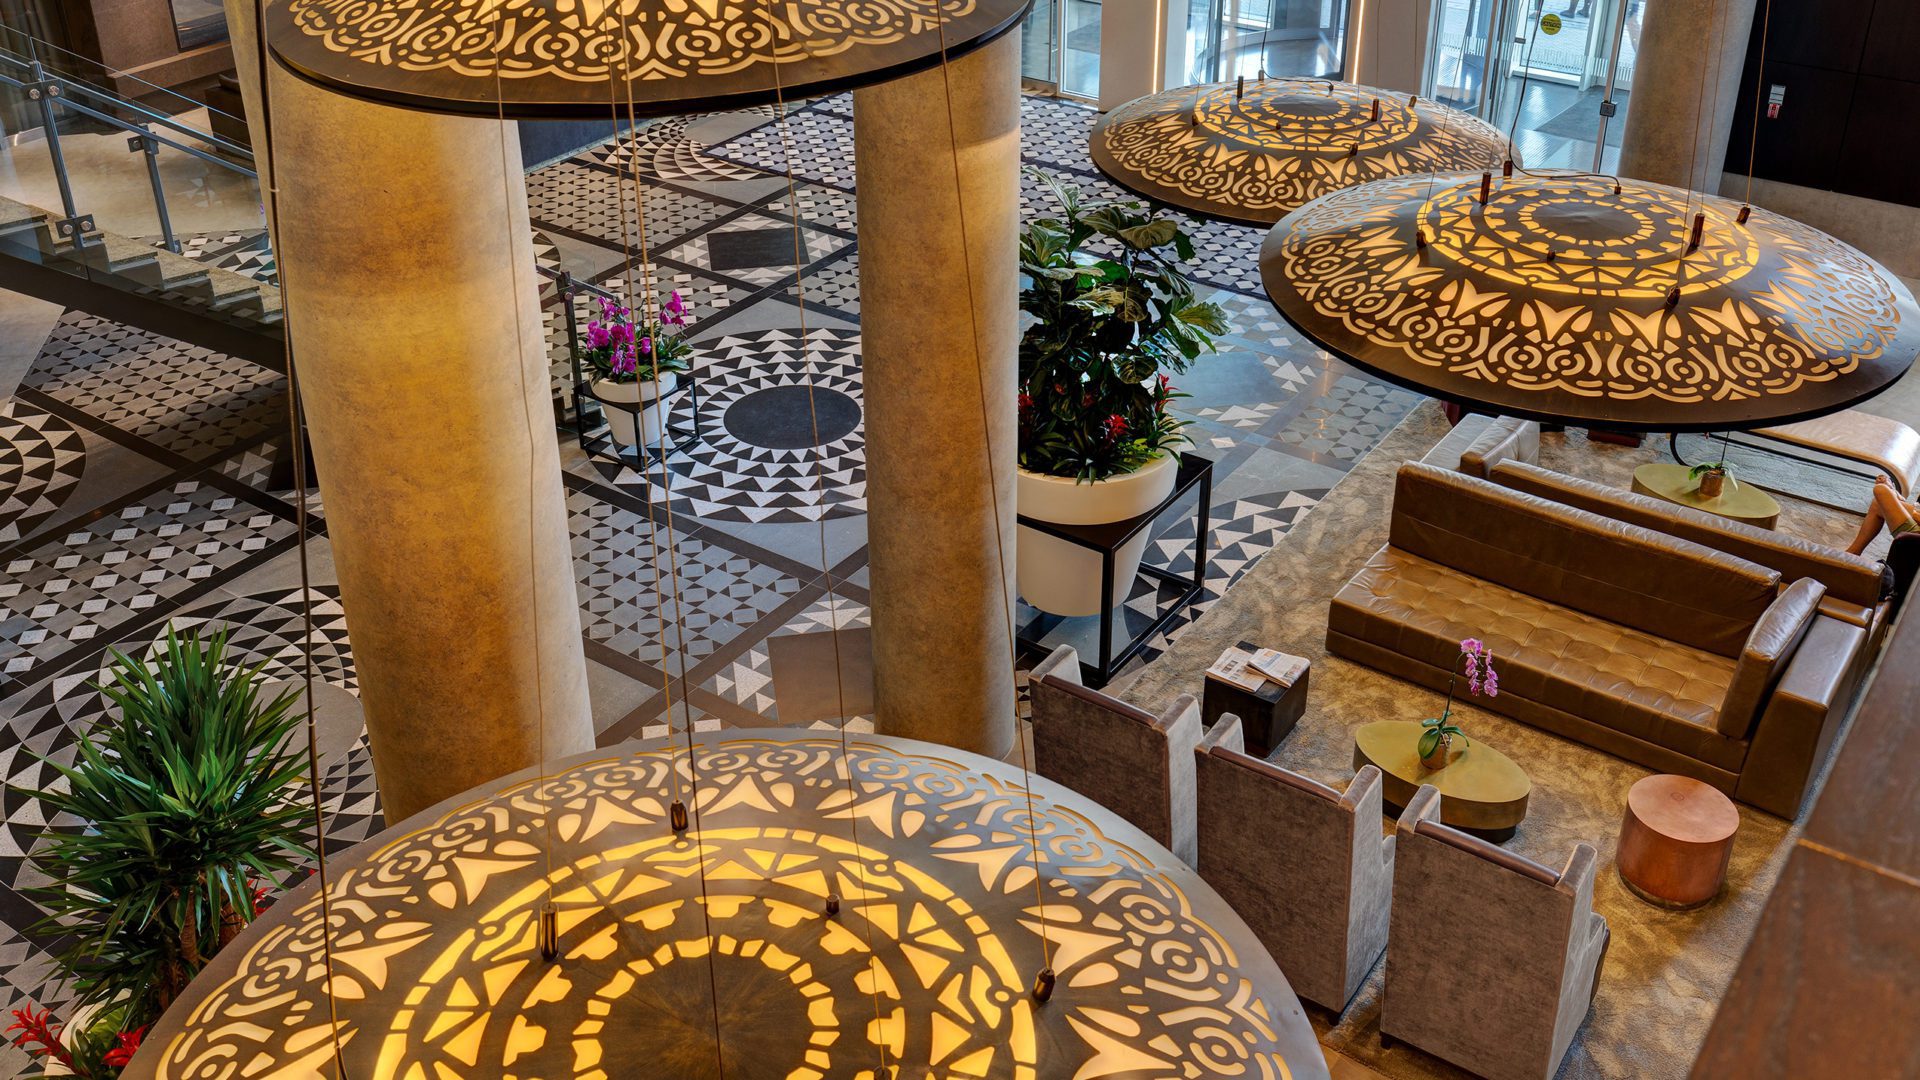 high view of hotel x lobby. large and decorated entrance with tiled floors